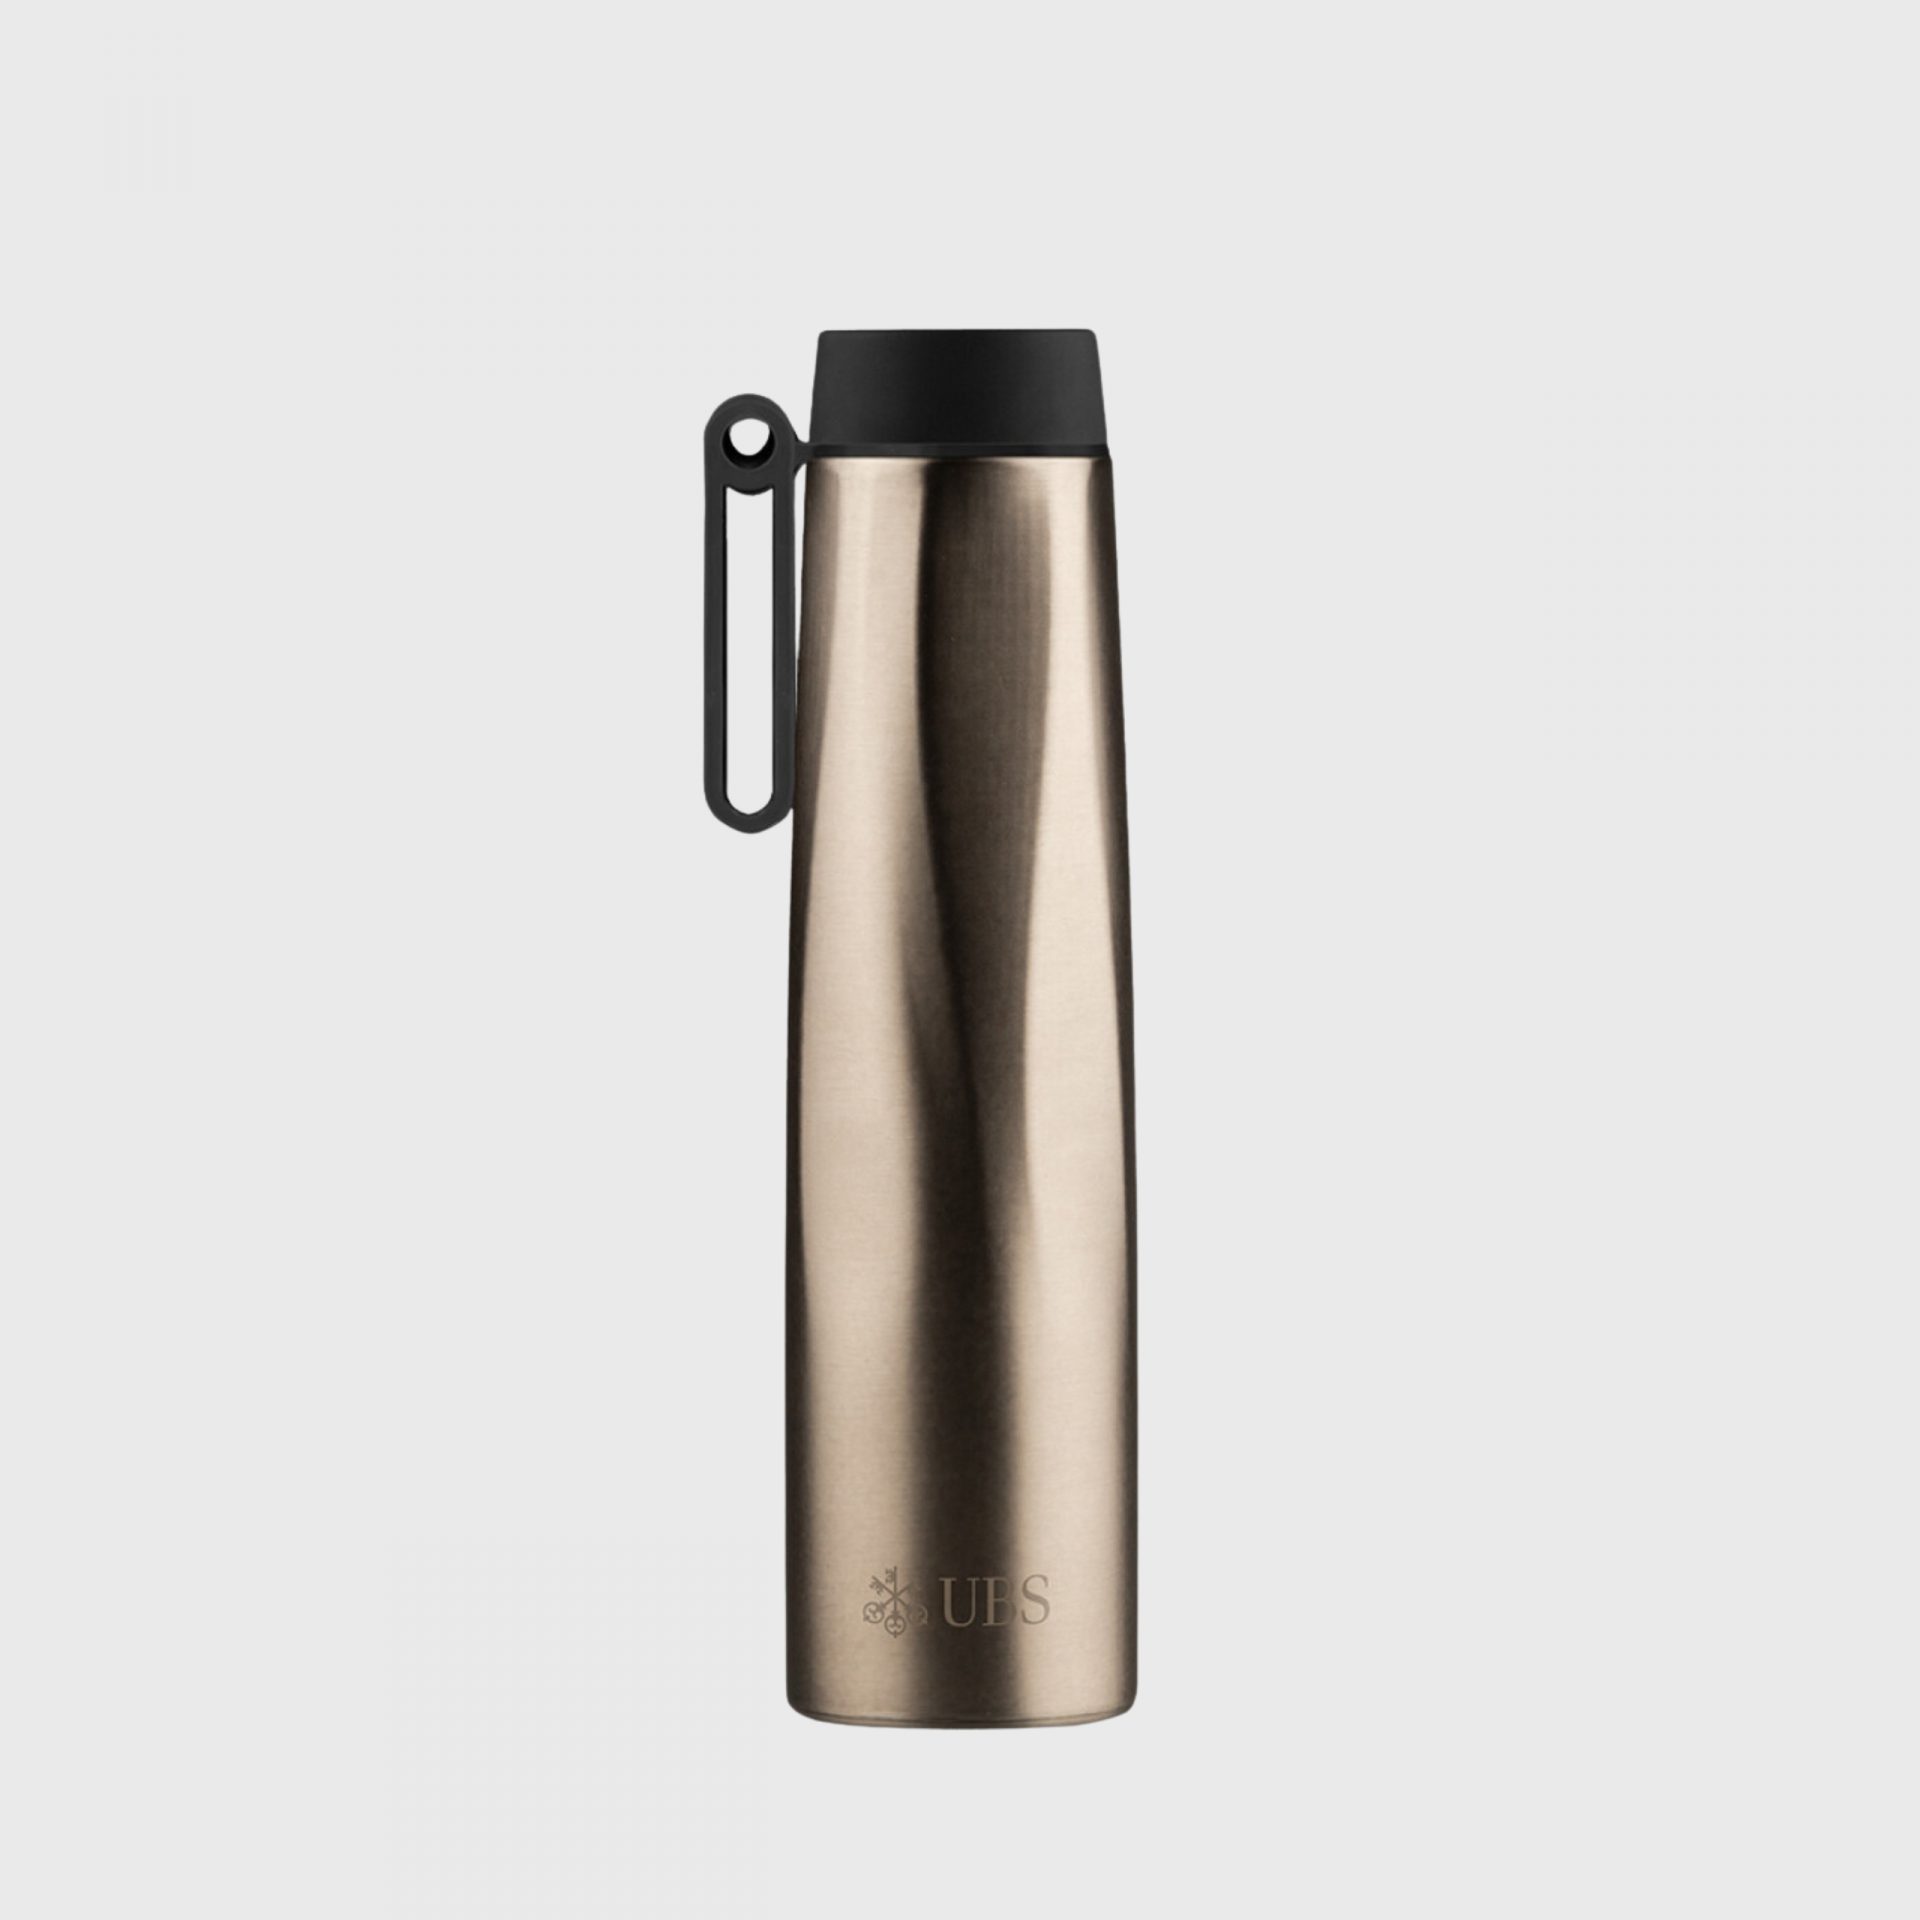 Sustainable Corporate Gifts Singapore Bottle Made from Recycled Stainless Steel 0.75L 25oz